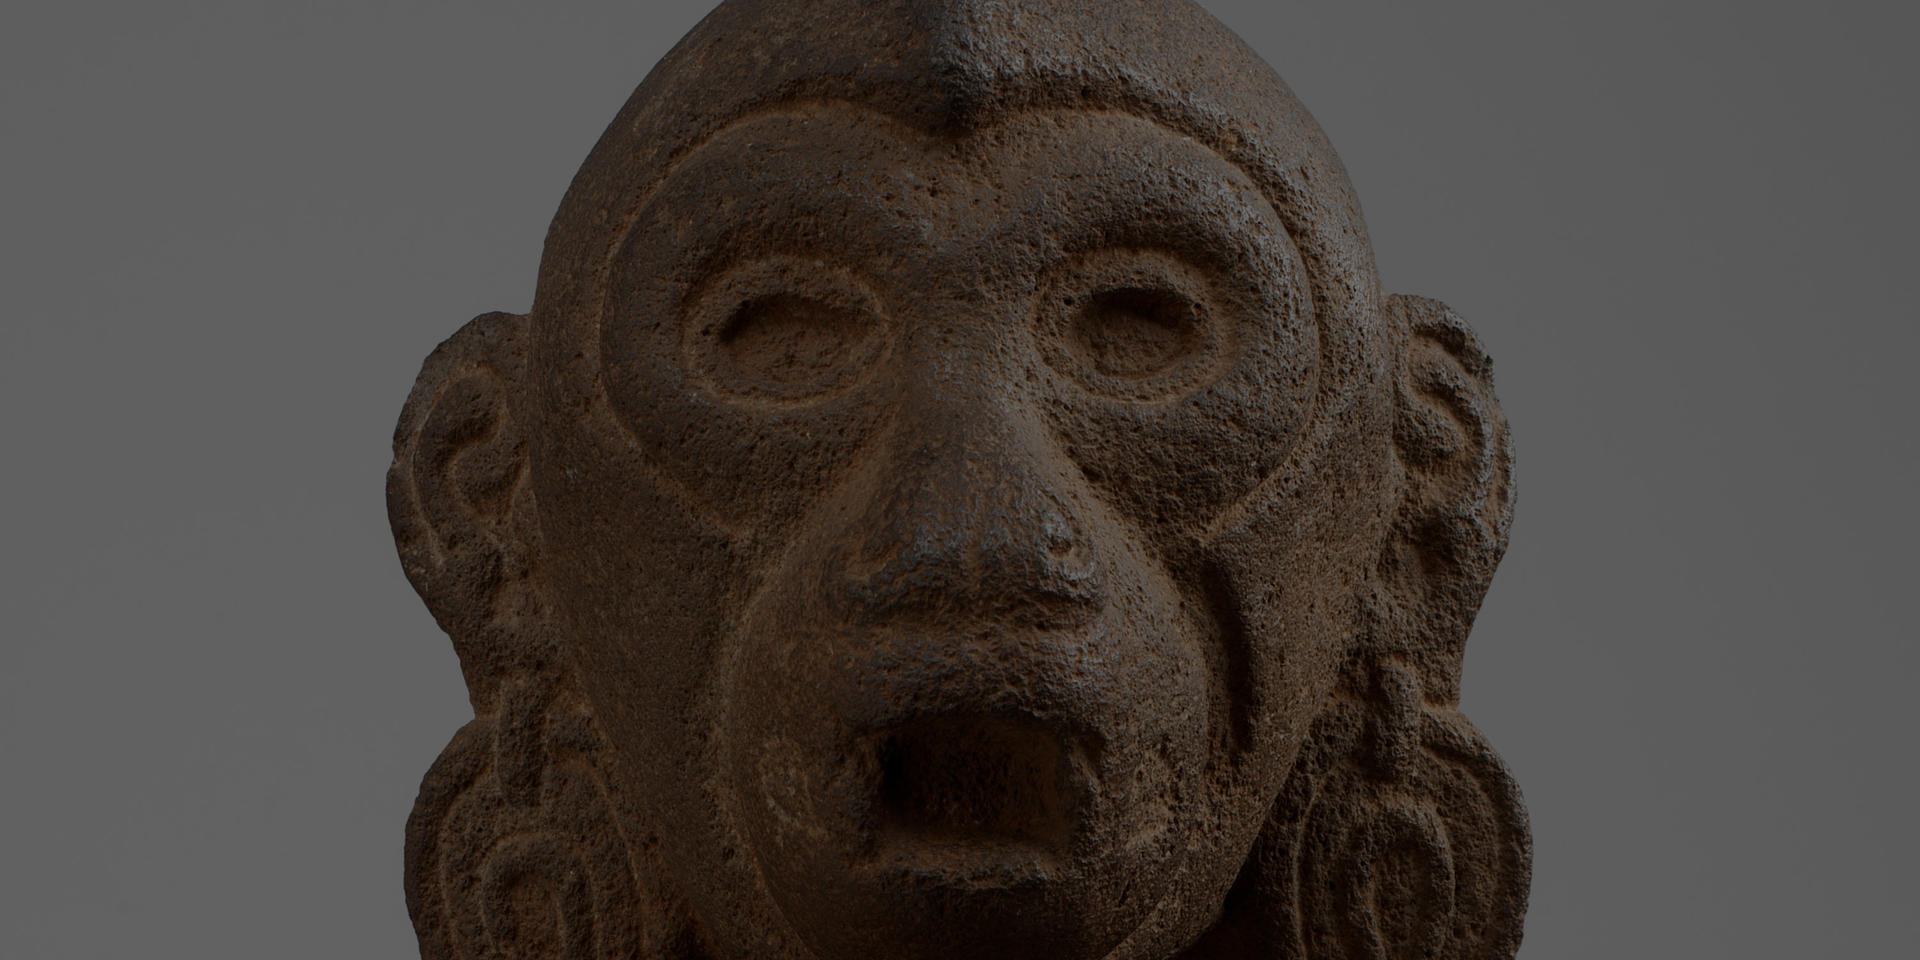 Detail of a dark brown, porous sculpture of a monkey head with a gray background.  The monkey has wide open eyes, large earrings, and an open mouth.